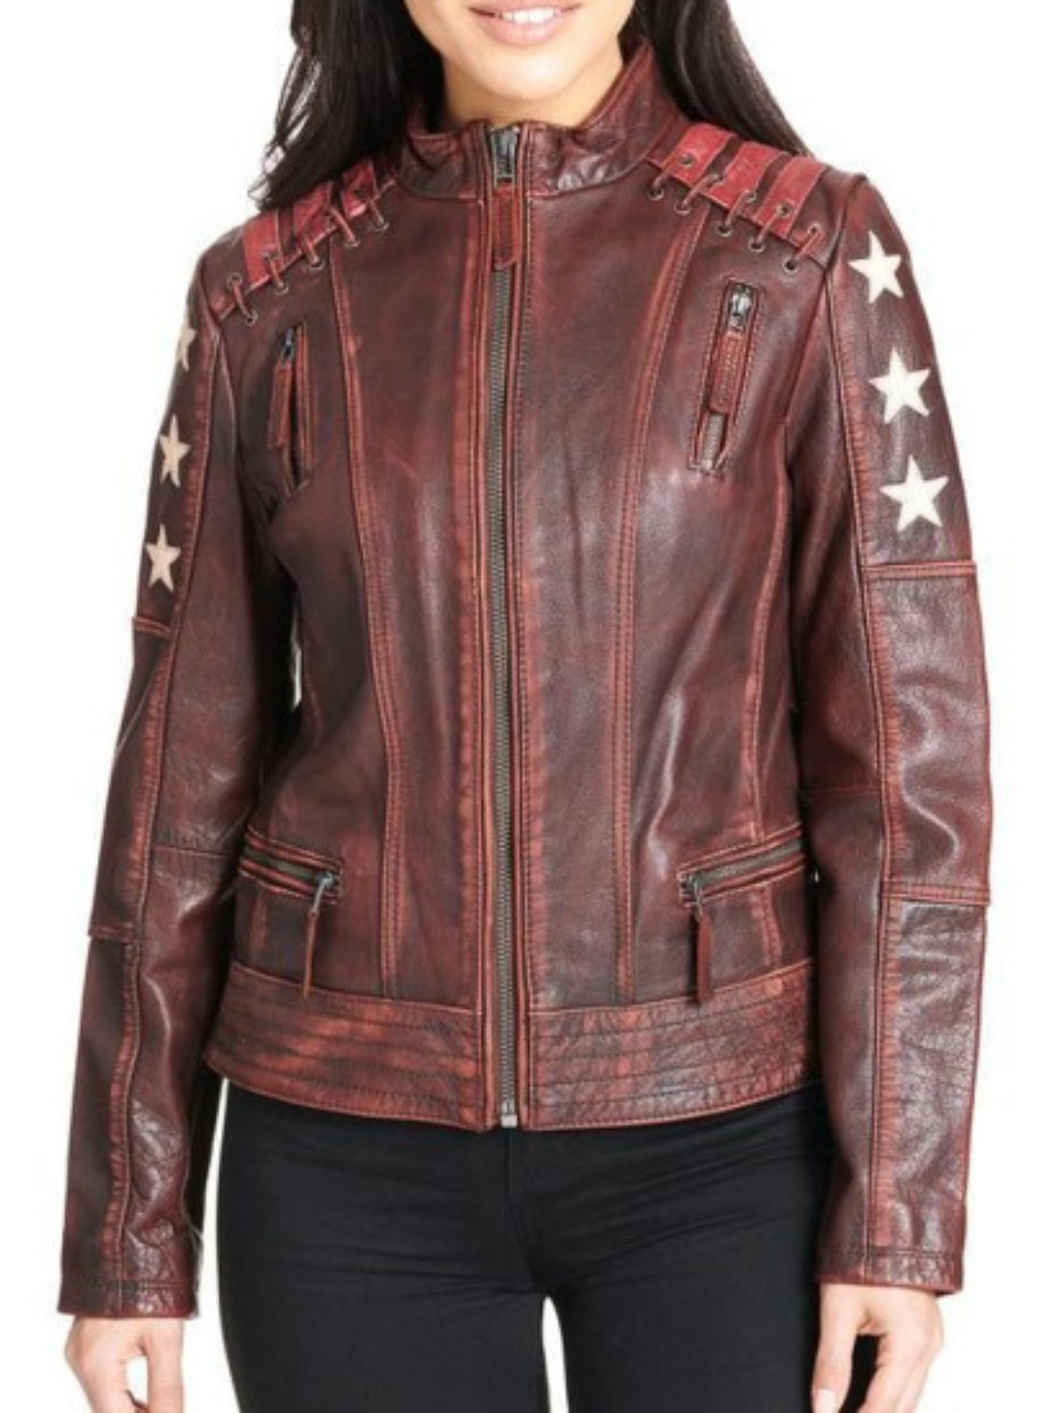 Women's Motorcycle Stars and Stripes Distressed Brown Leather Jacket